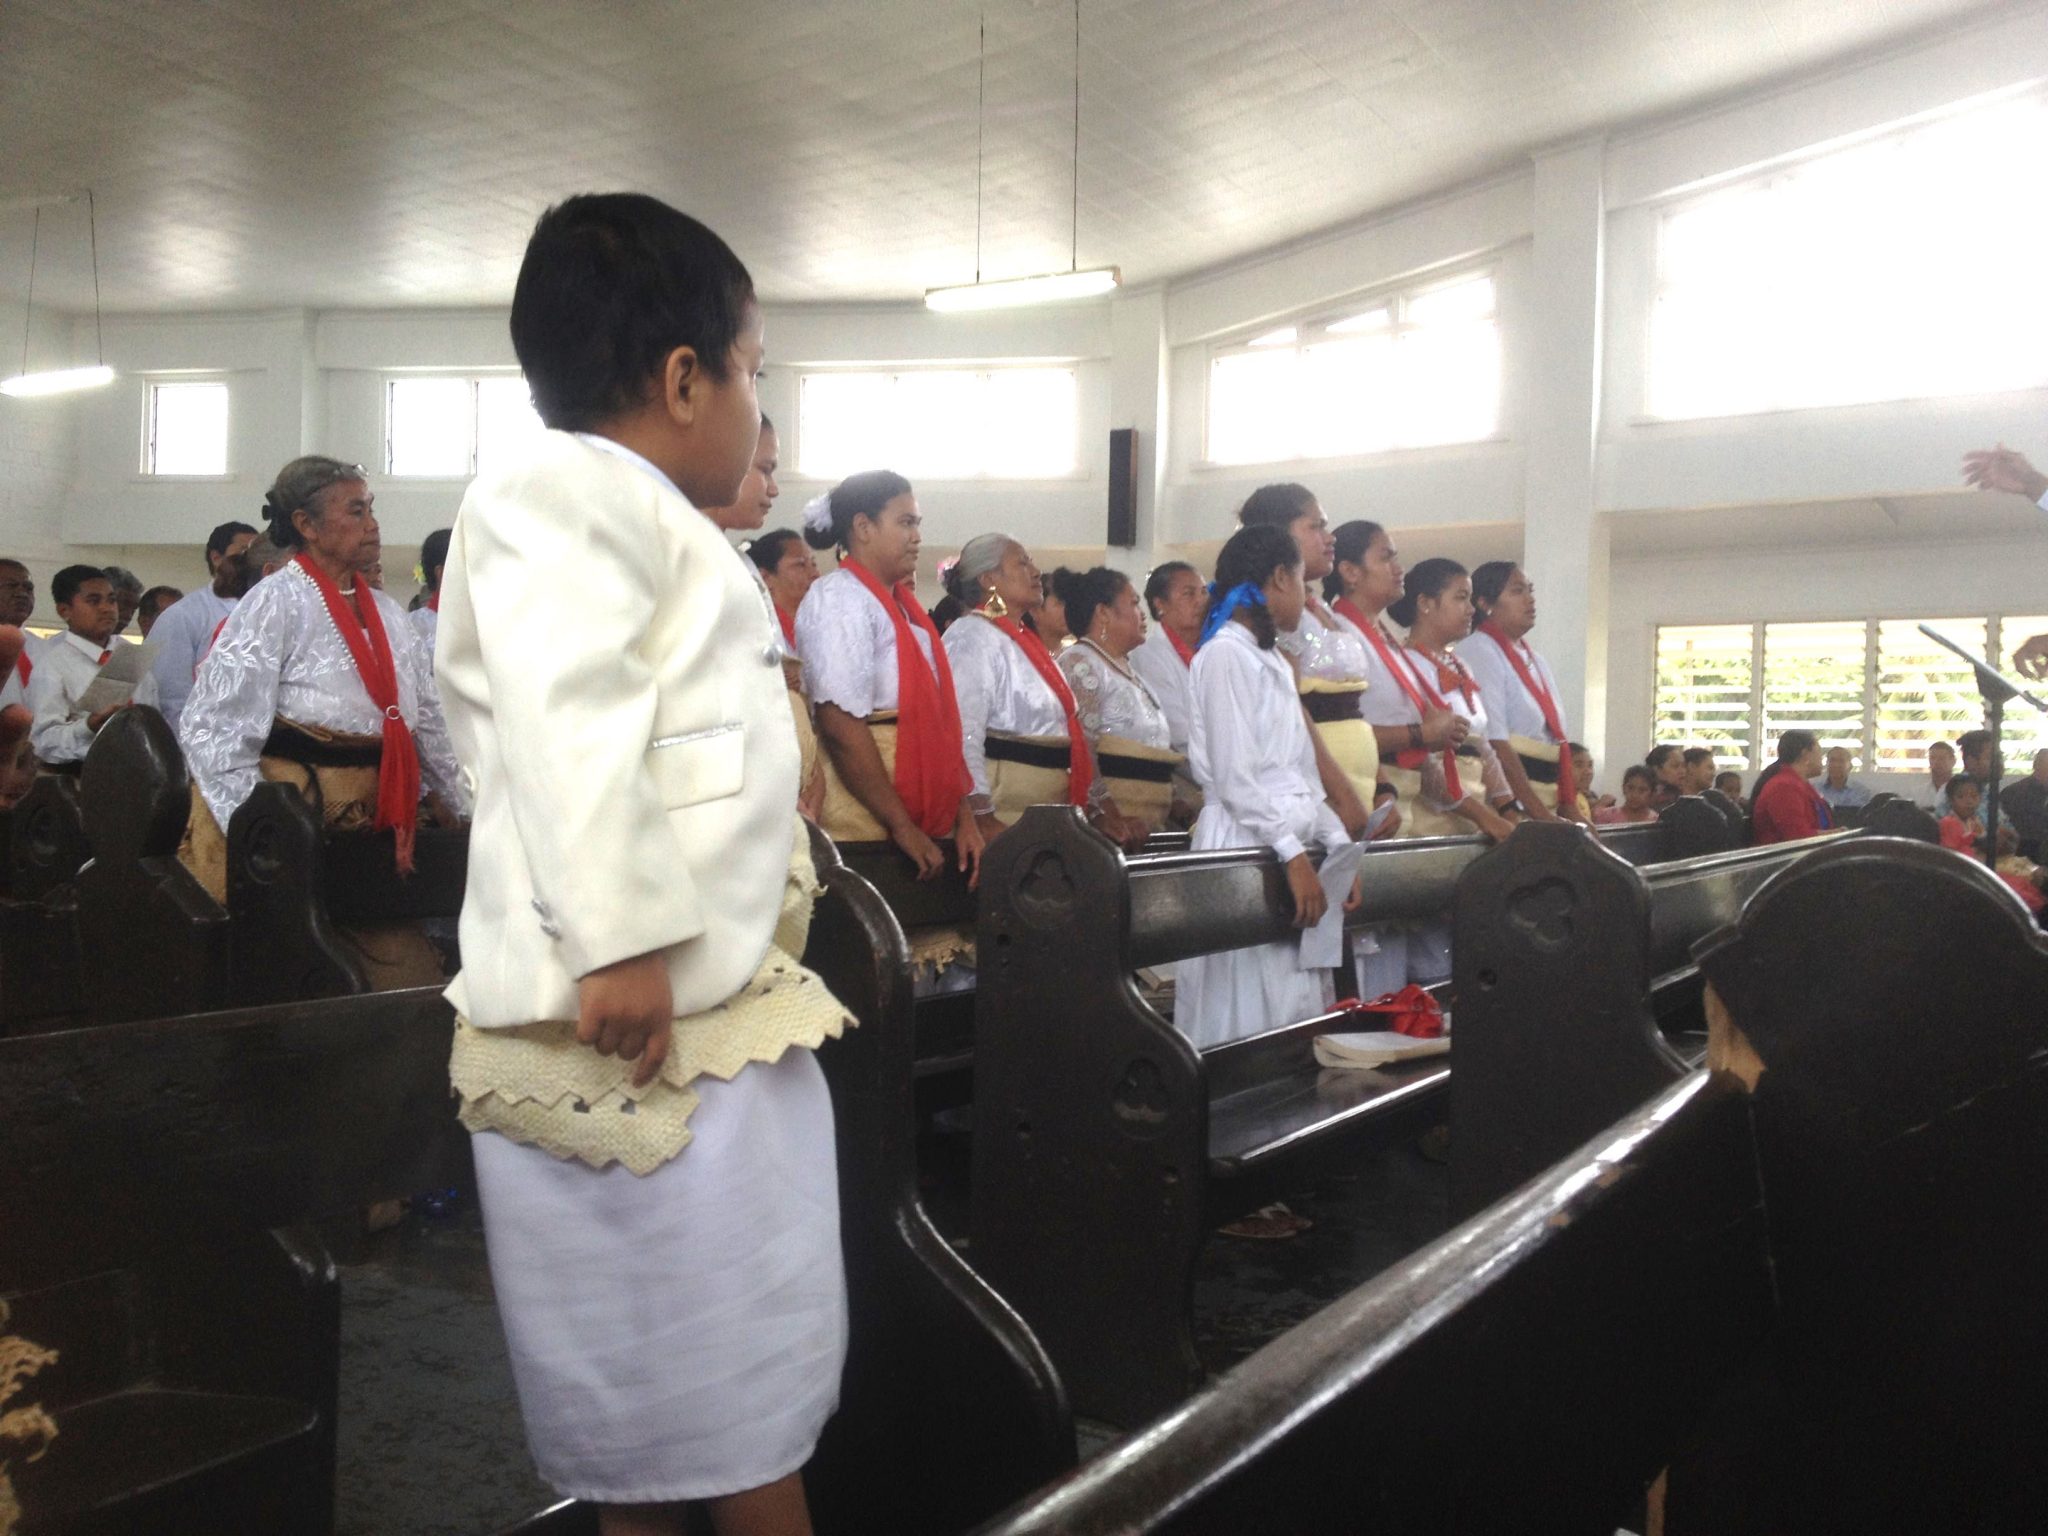 8. In the Free Wesleyan Church of Tonga, a young lad wears a Tongan sarong covered with the woven wrap signifying allegiance to the crown of Tonga. The choir in the background and most of the congregation also wore these traditional garments